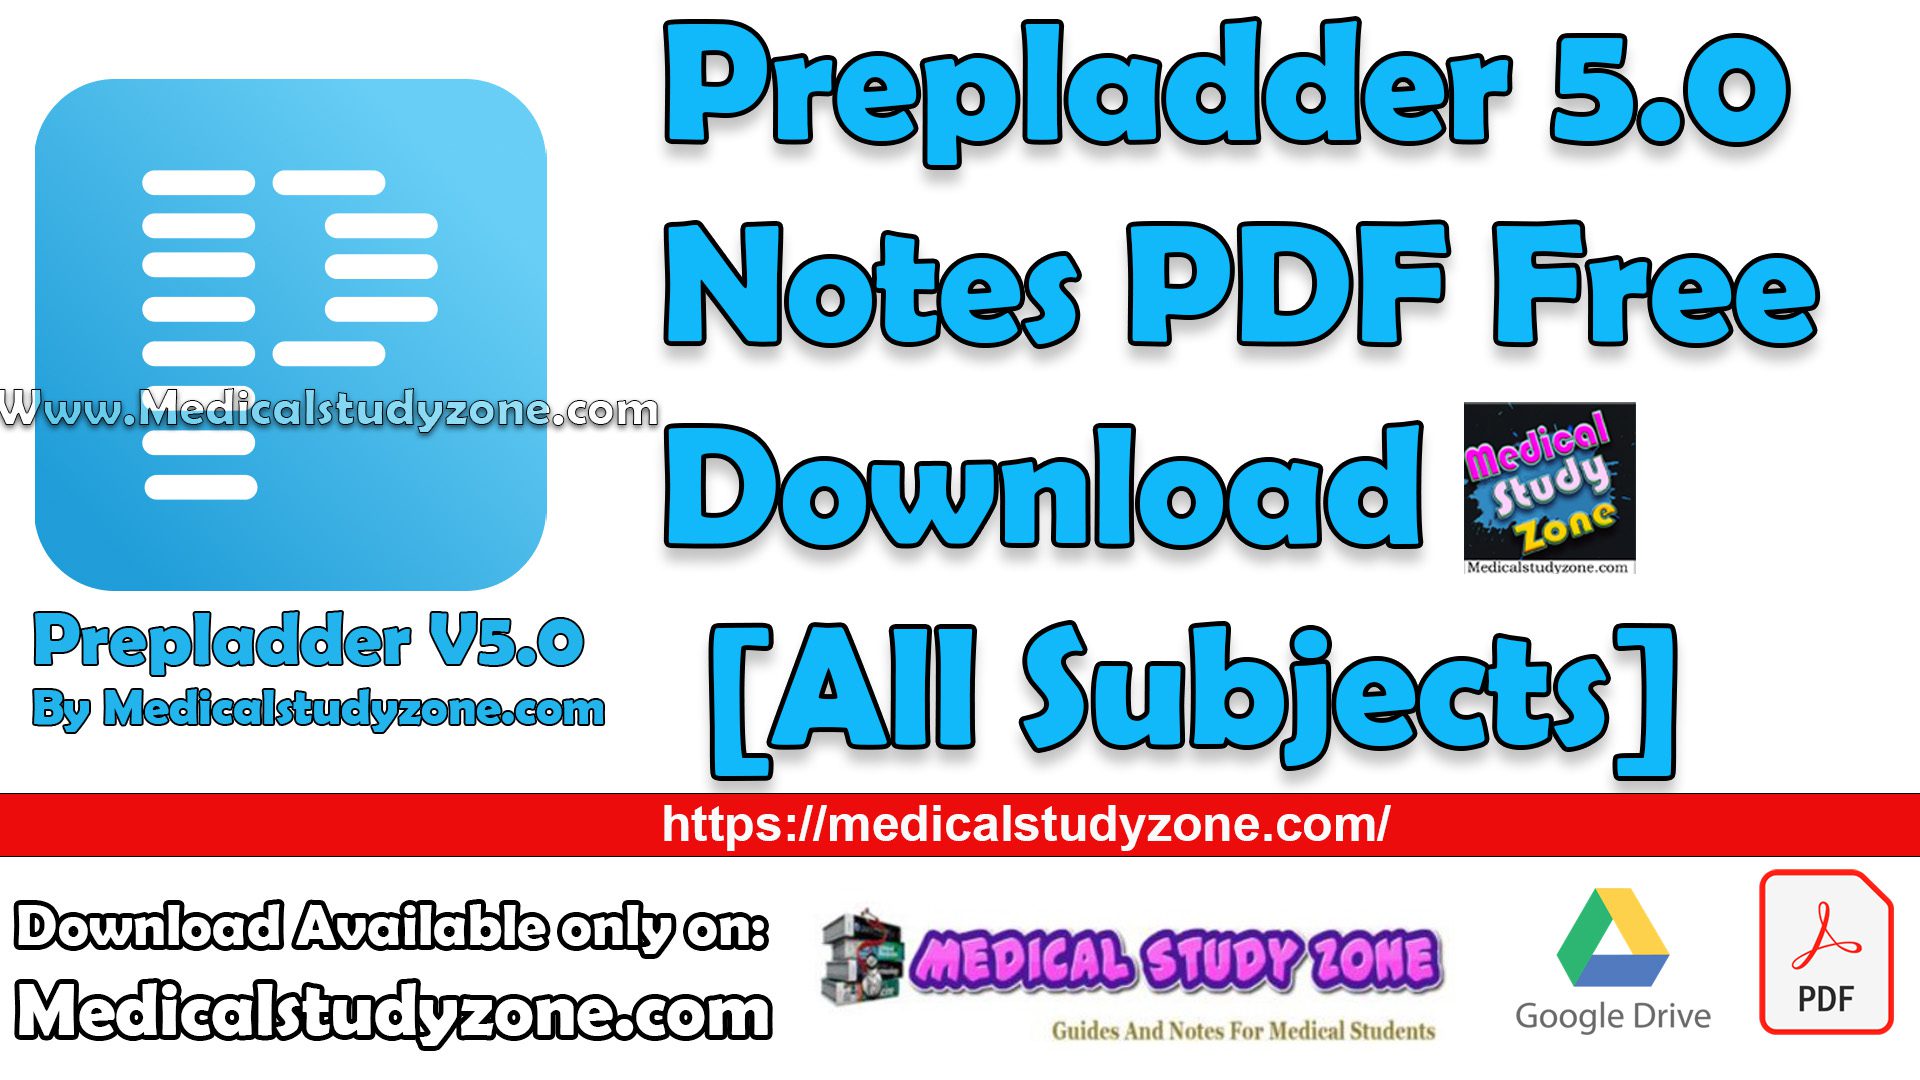 Prepladder 5.0 Notes Next Edition PDF Free Download [All Subjects]